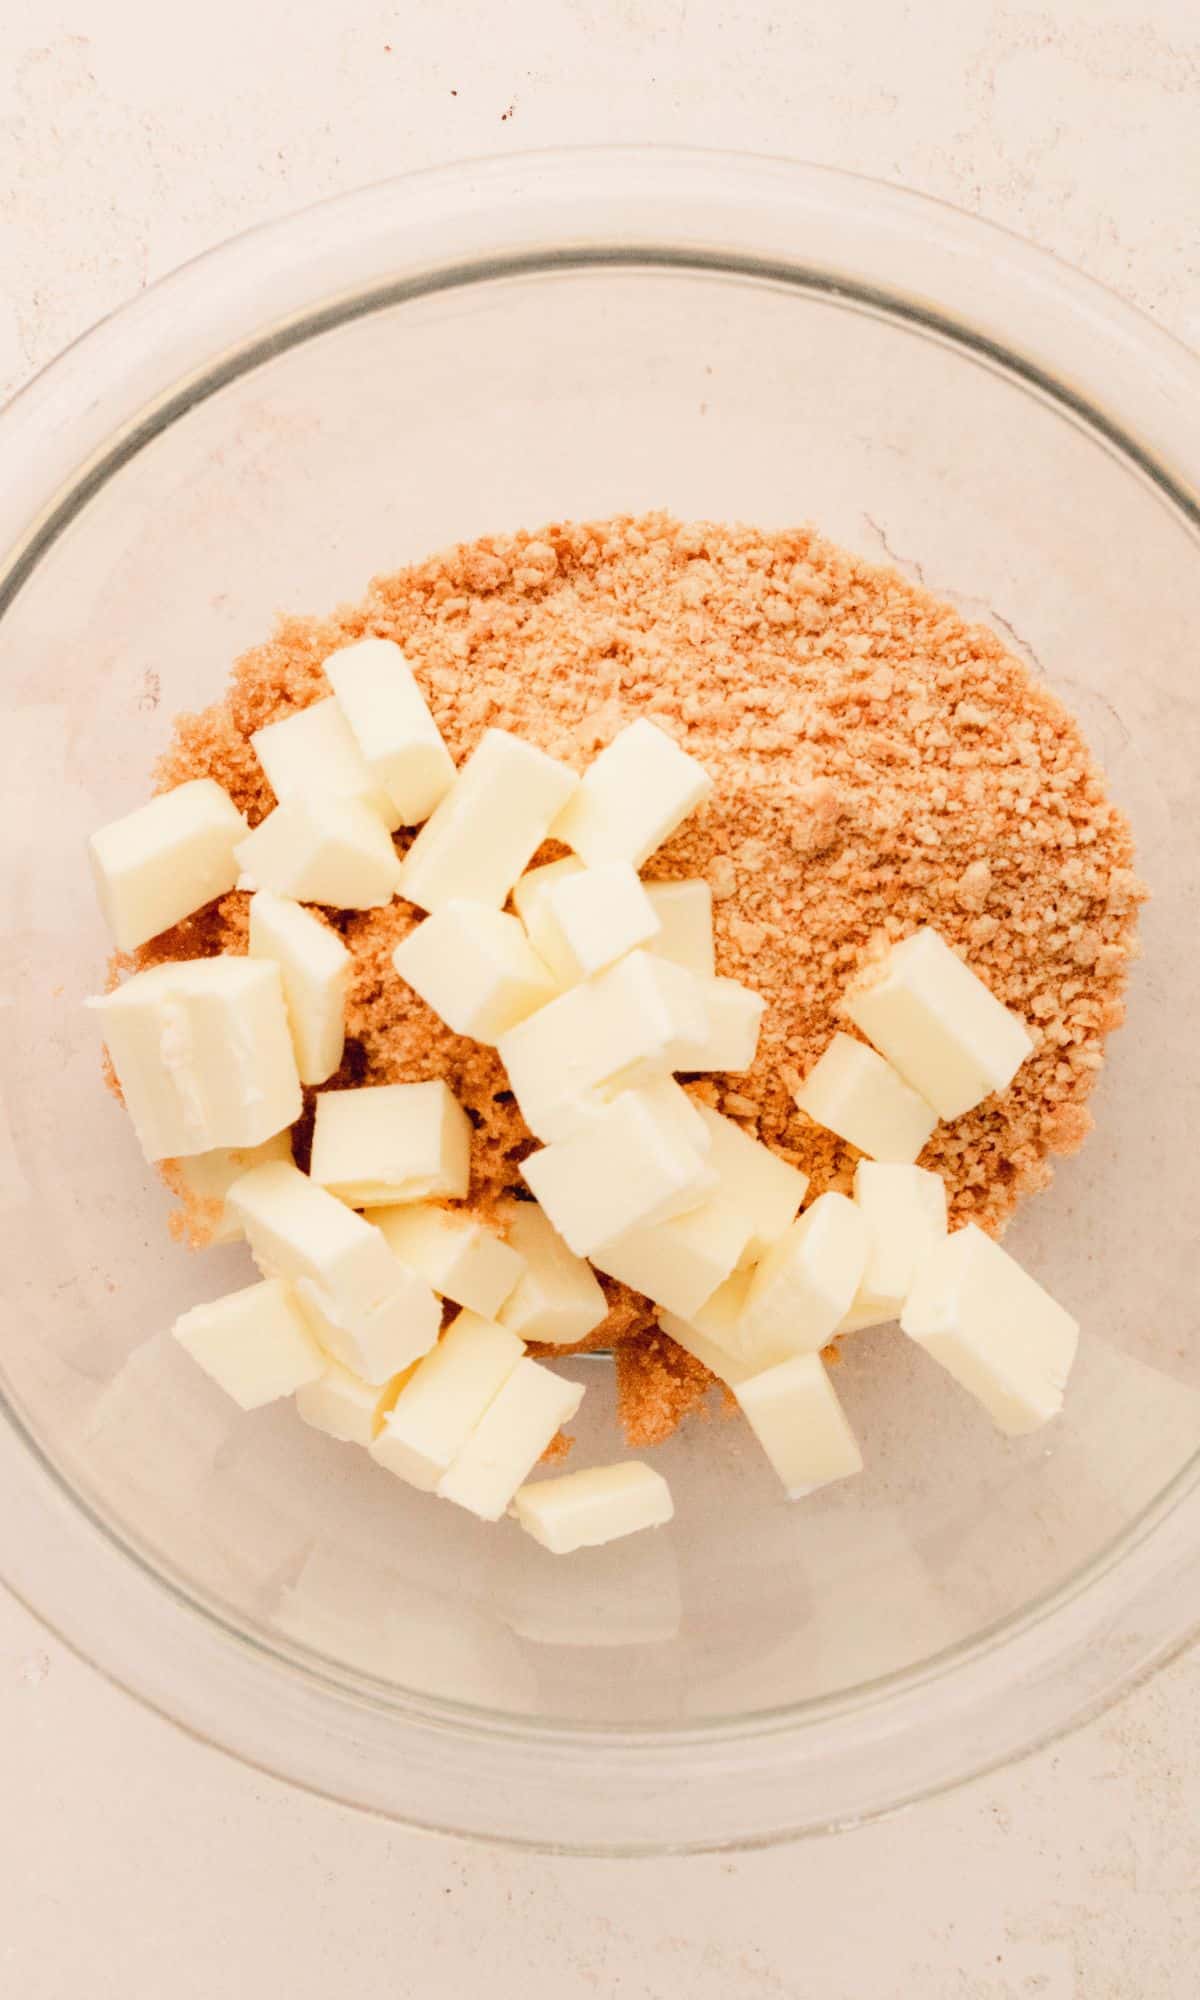 Butter, brown sugar and graham cracker crumbs in a glass bowl.